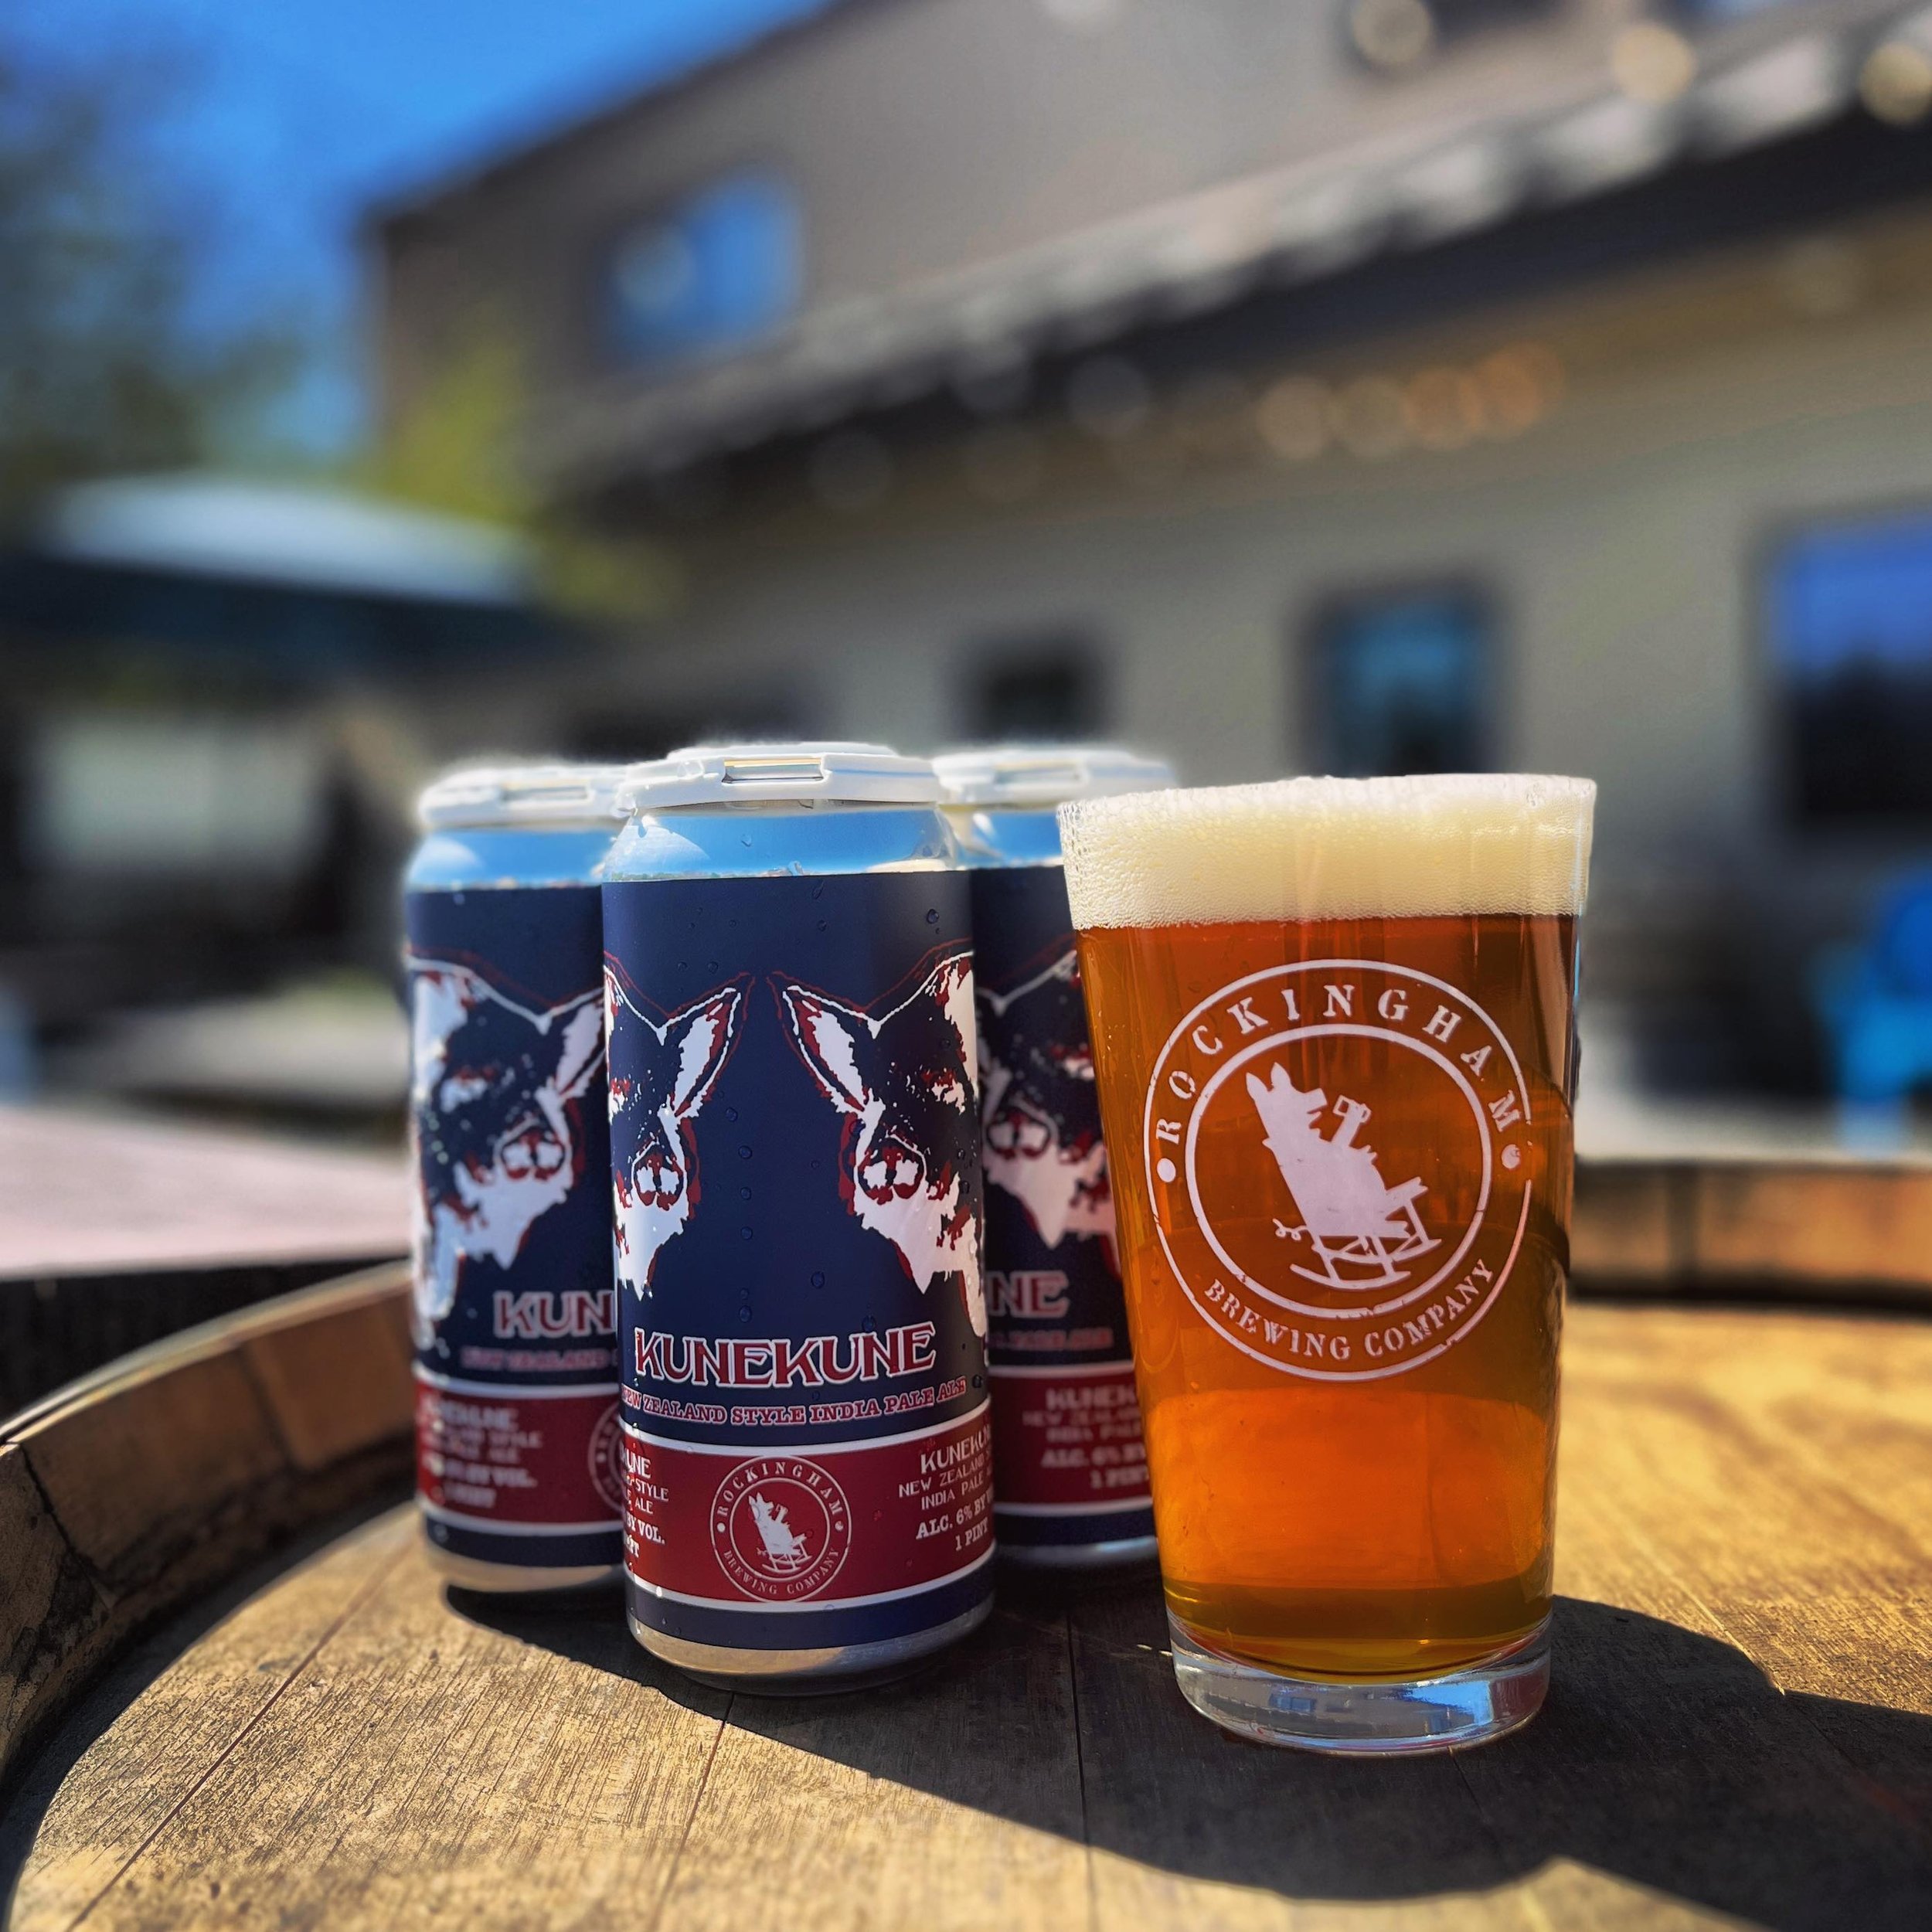 Since its release, Kunekune has quickly become one of our best selling beers in the taproom. Come crush one of these New Zealand IPAs on our patio and find out why! Open 2-8p with @baltickitchennh slinging their homemade pierogi!